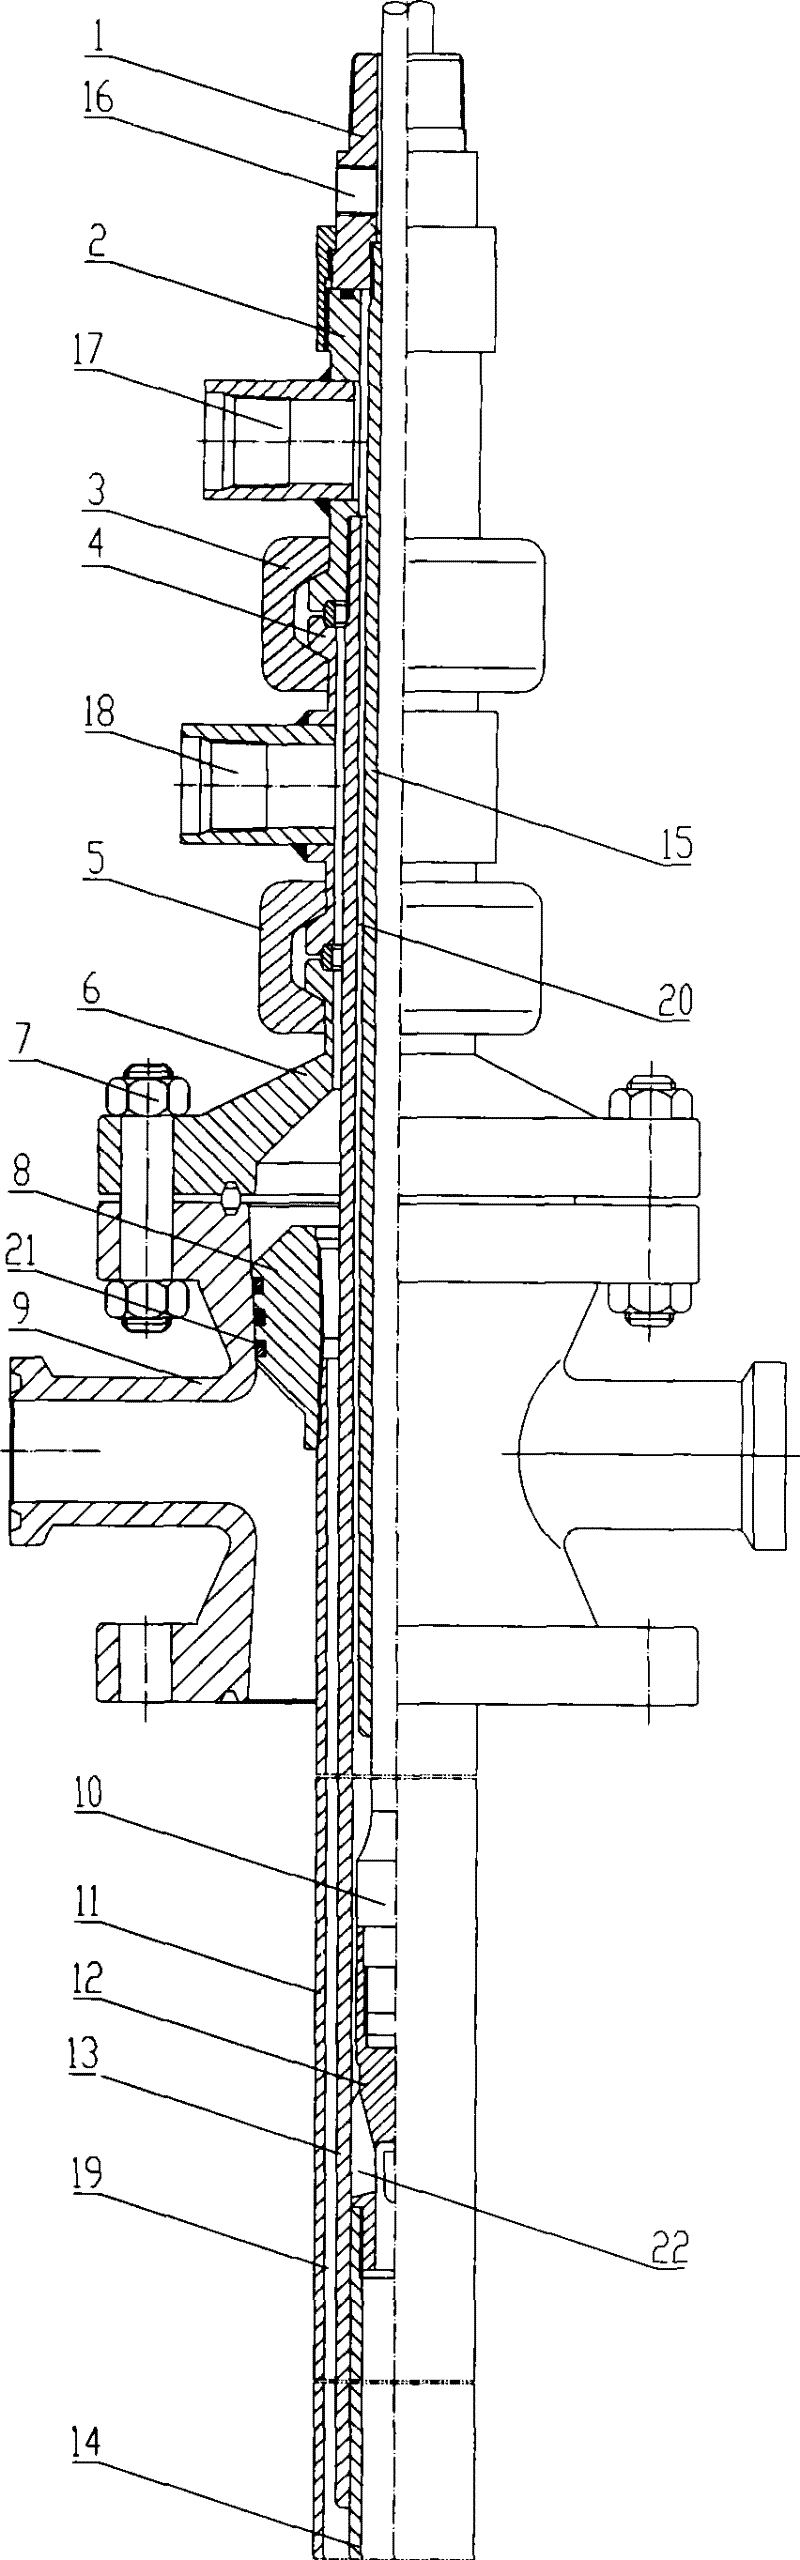 Hollow rod water mixing wellhead device